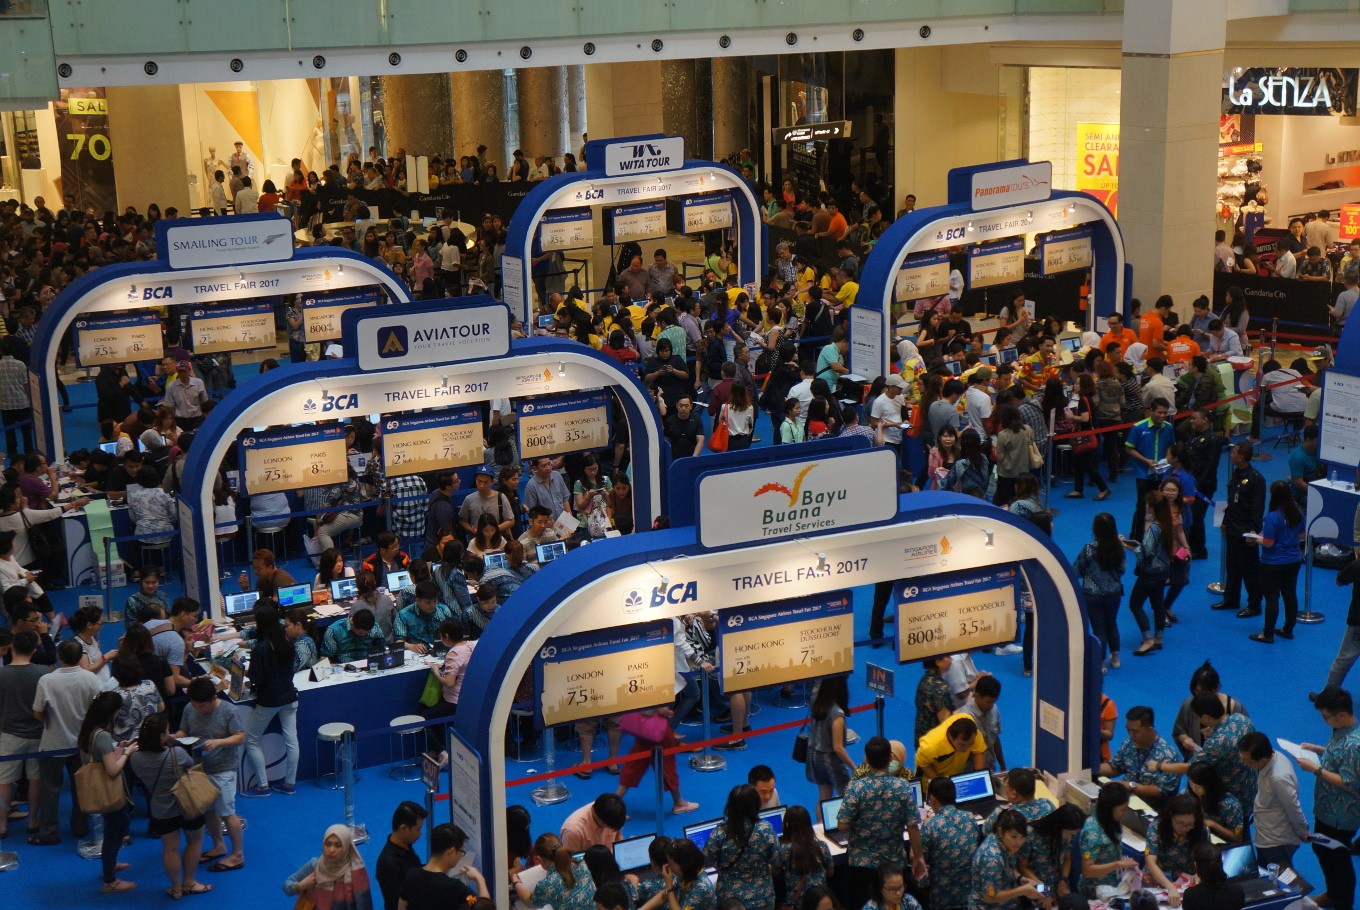 Annual travel fair lures travelers with discounts, new routes News